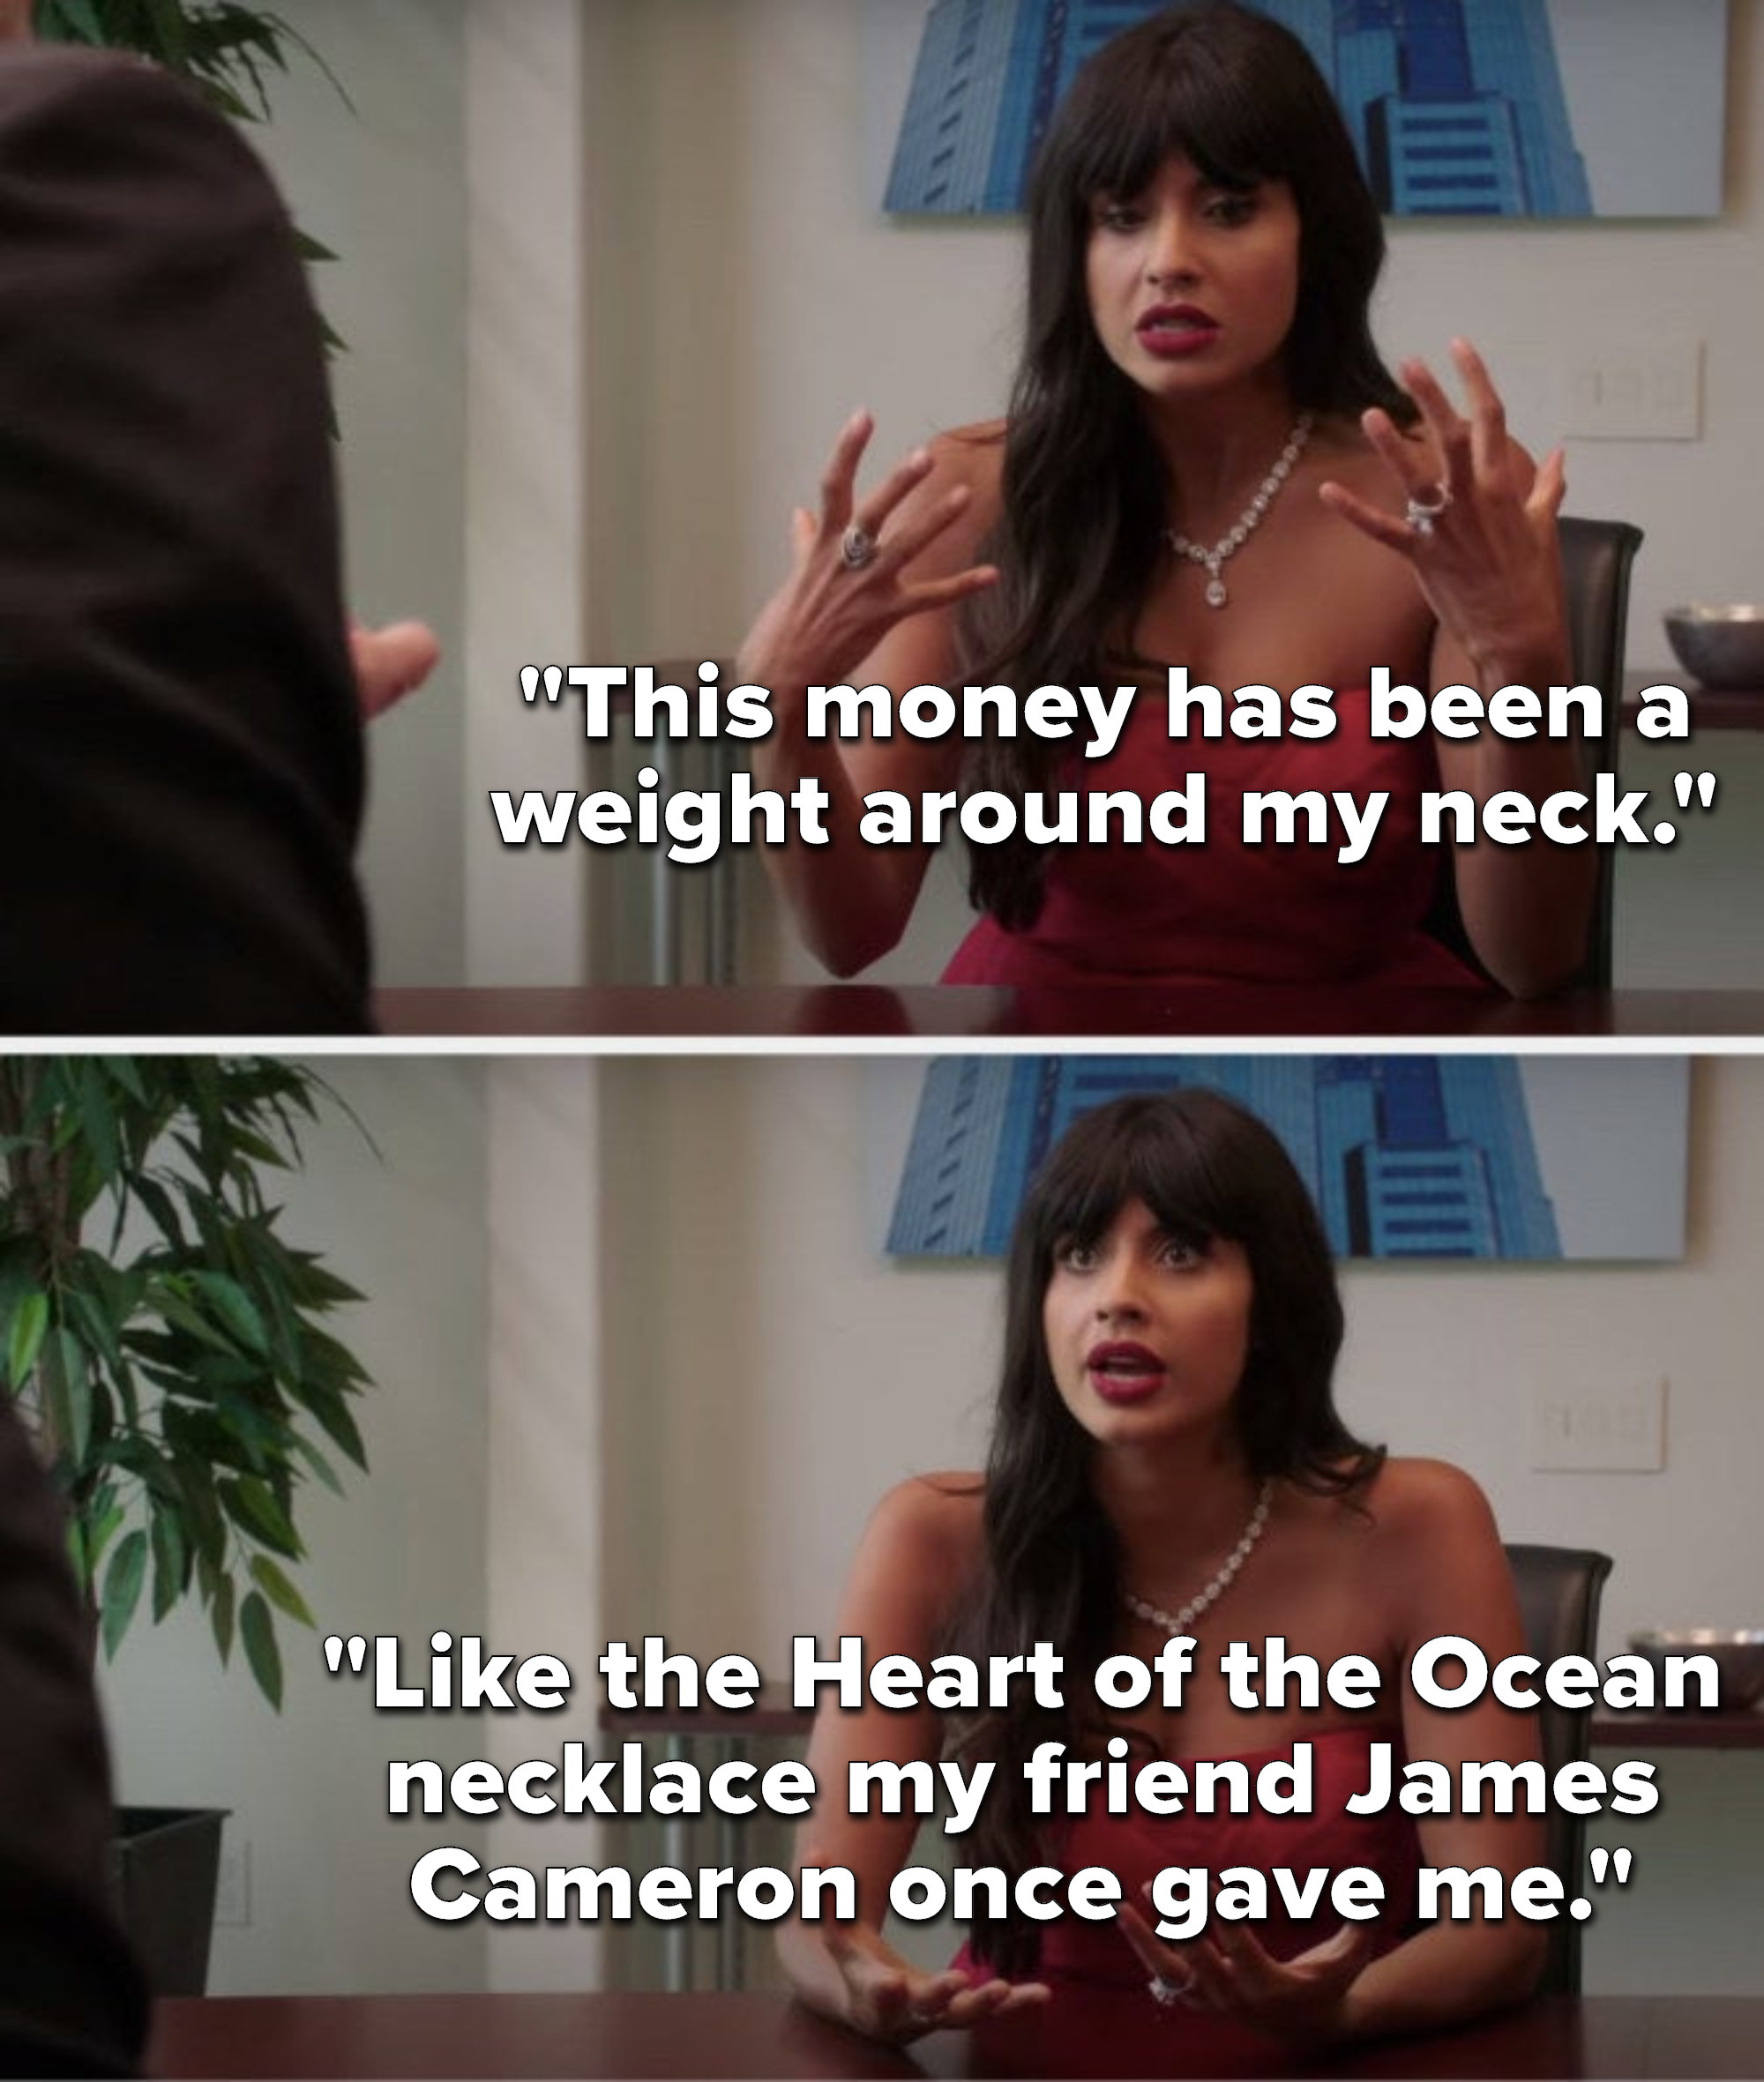 On The Good Place, Tahani says, &quot;This money has been a weight around my neck, like the Heart of the Ocean necklace my friend James Cameron once gave me&quot;